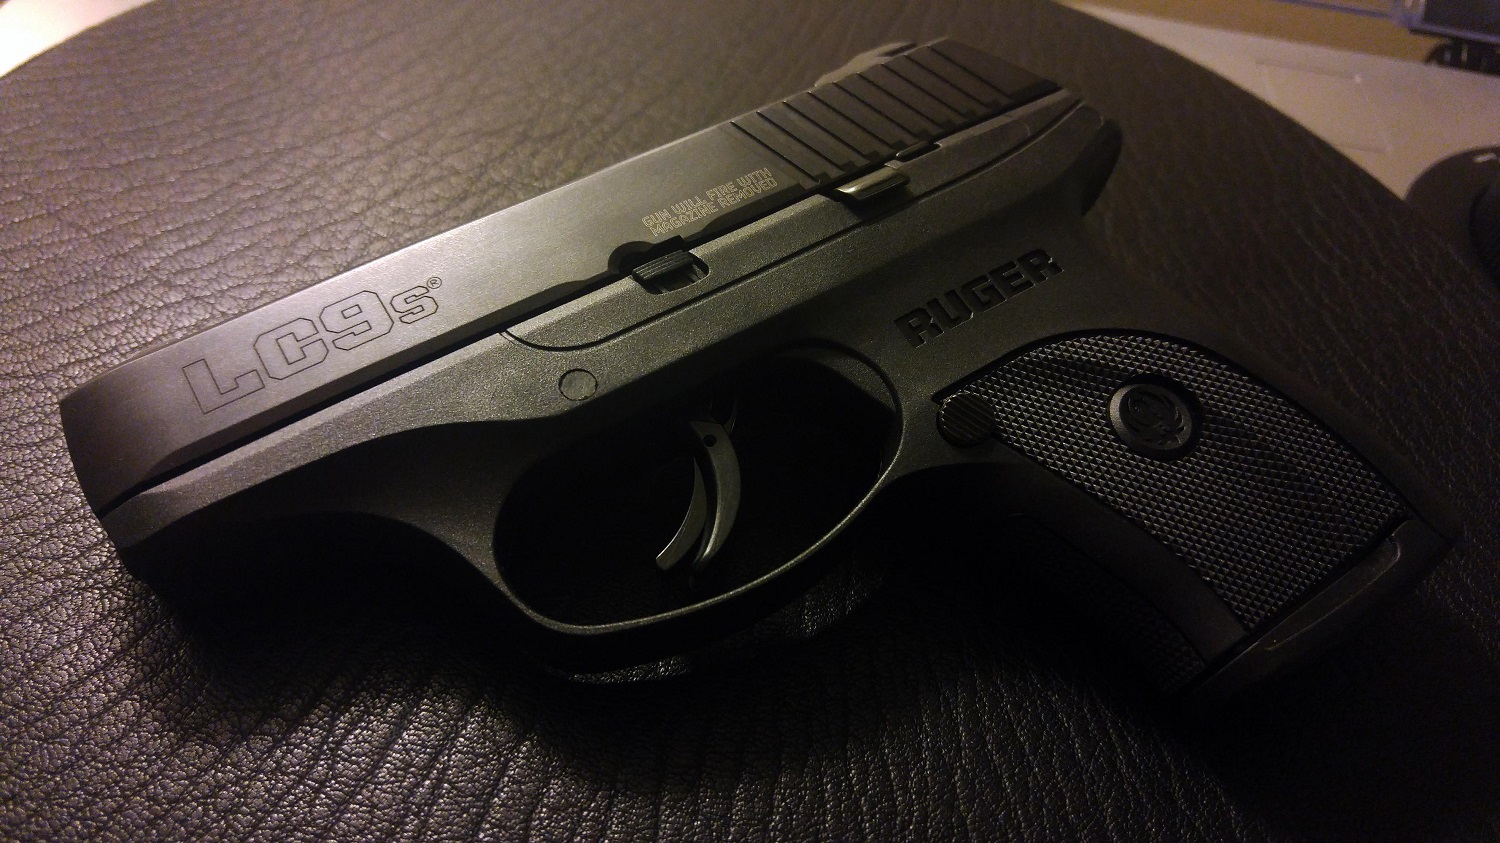 ruger lc9 vs lcp